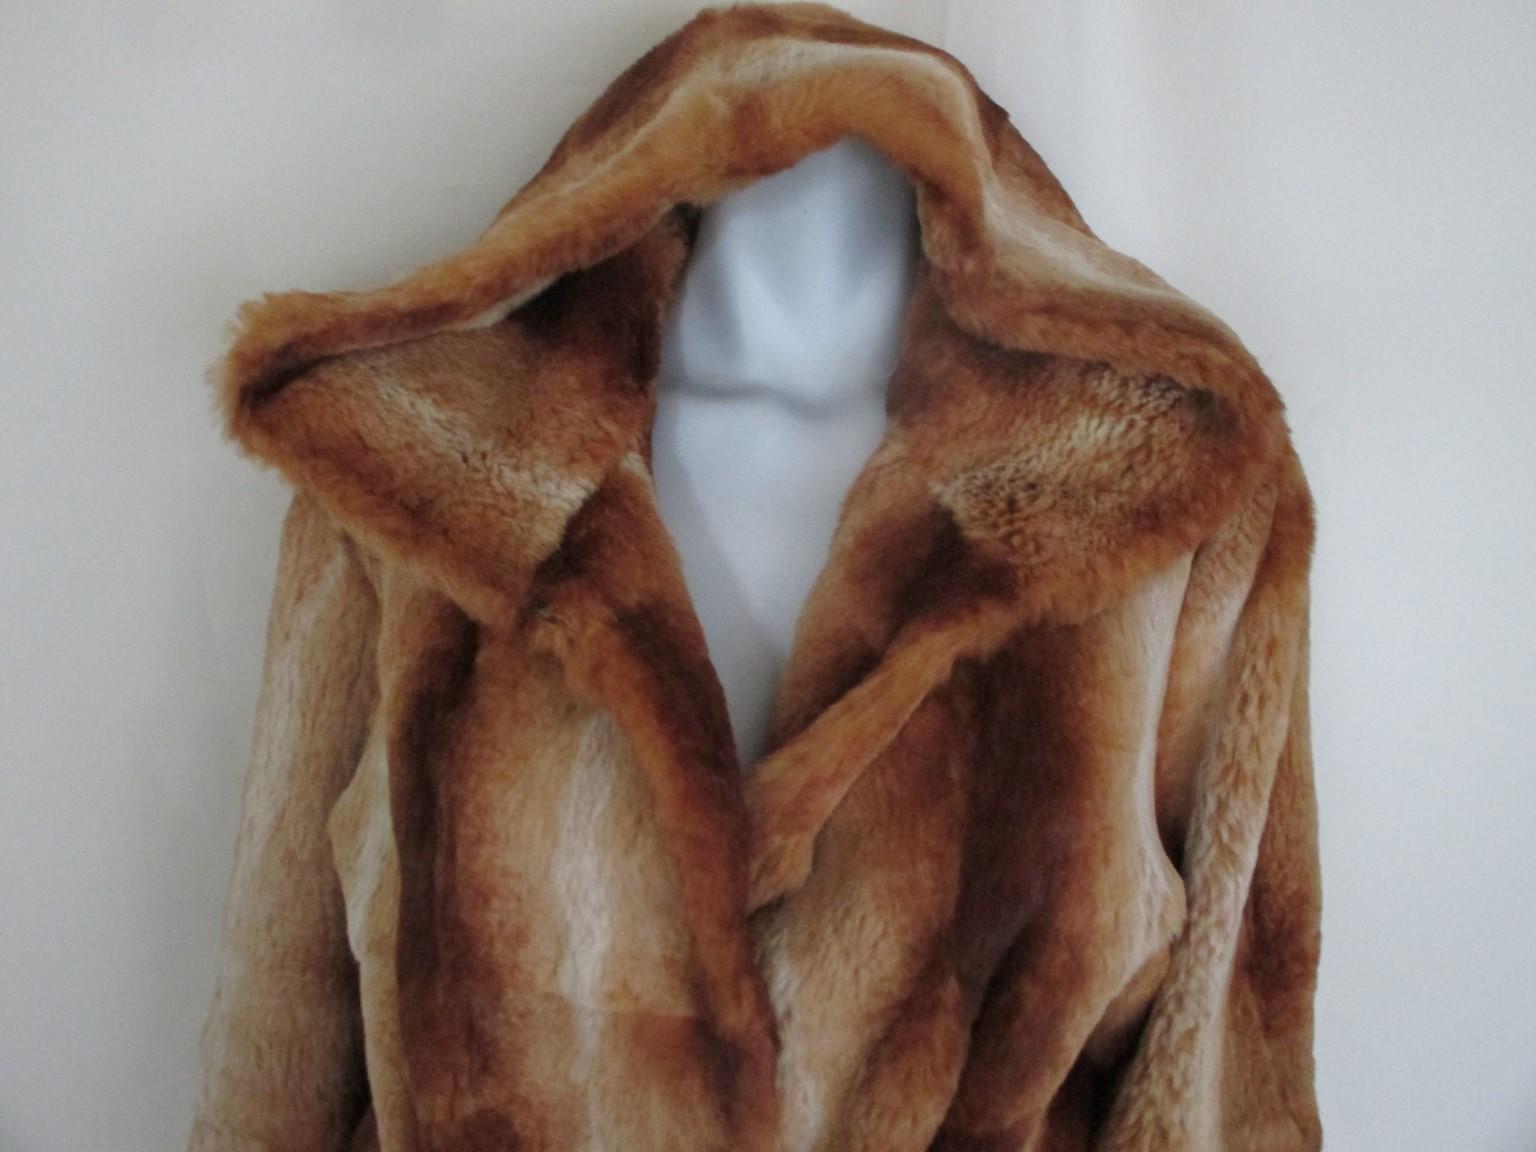 This jacket is made of soft chinchilla rex fur whith a hood and an inside belt.
It has 2 pockets and closes with 1 button at the collar and 3 closing hooks.
Not lined
This fur looks and feels like velvet, soft and supple.
Very light to wear
size US